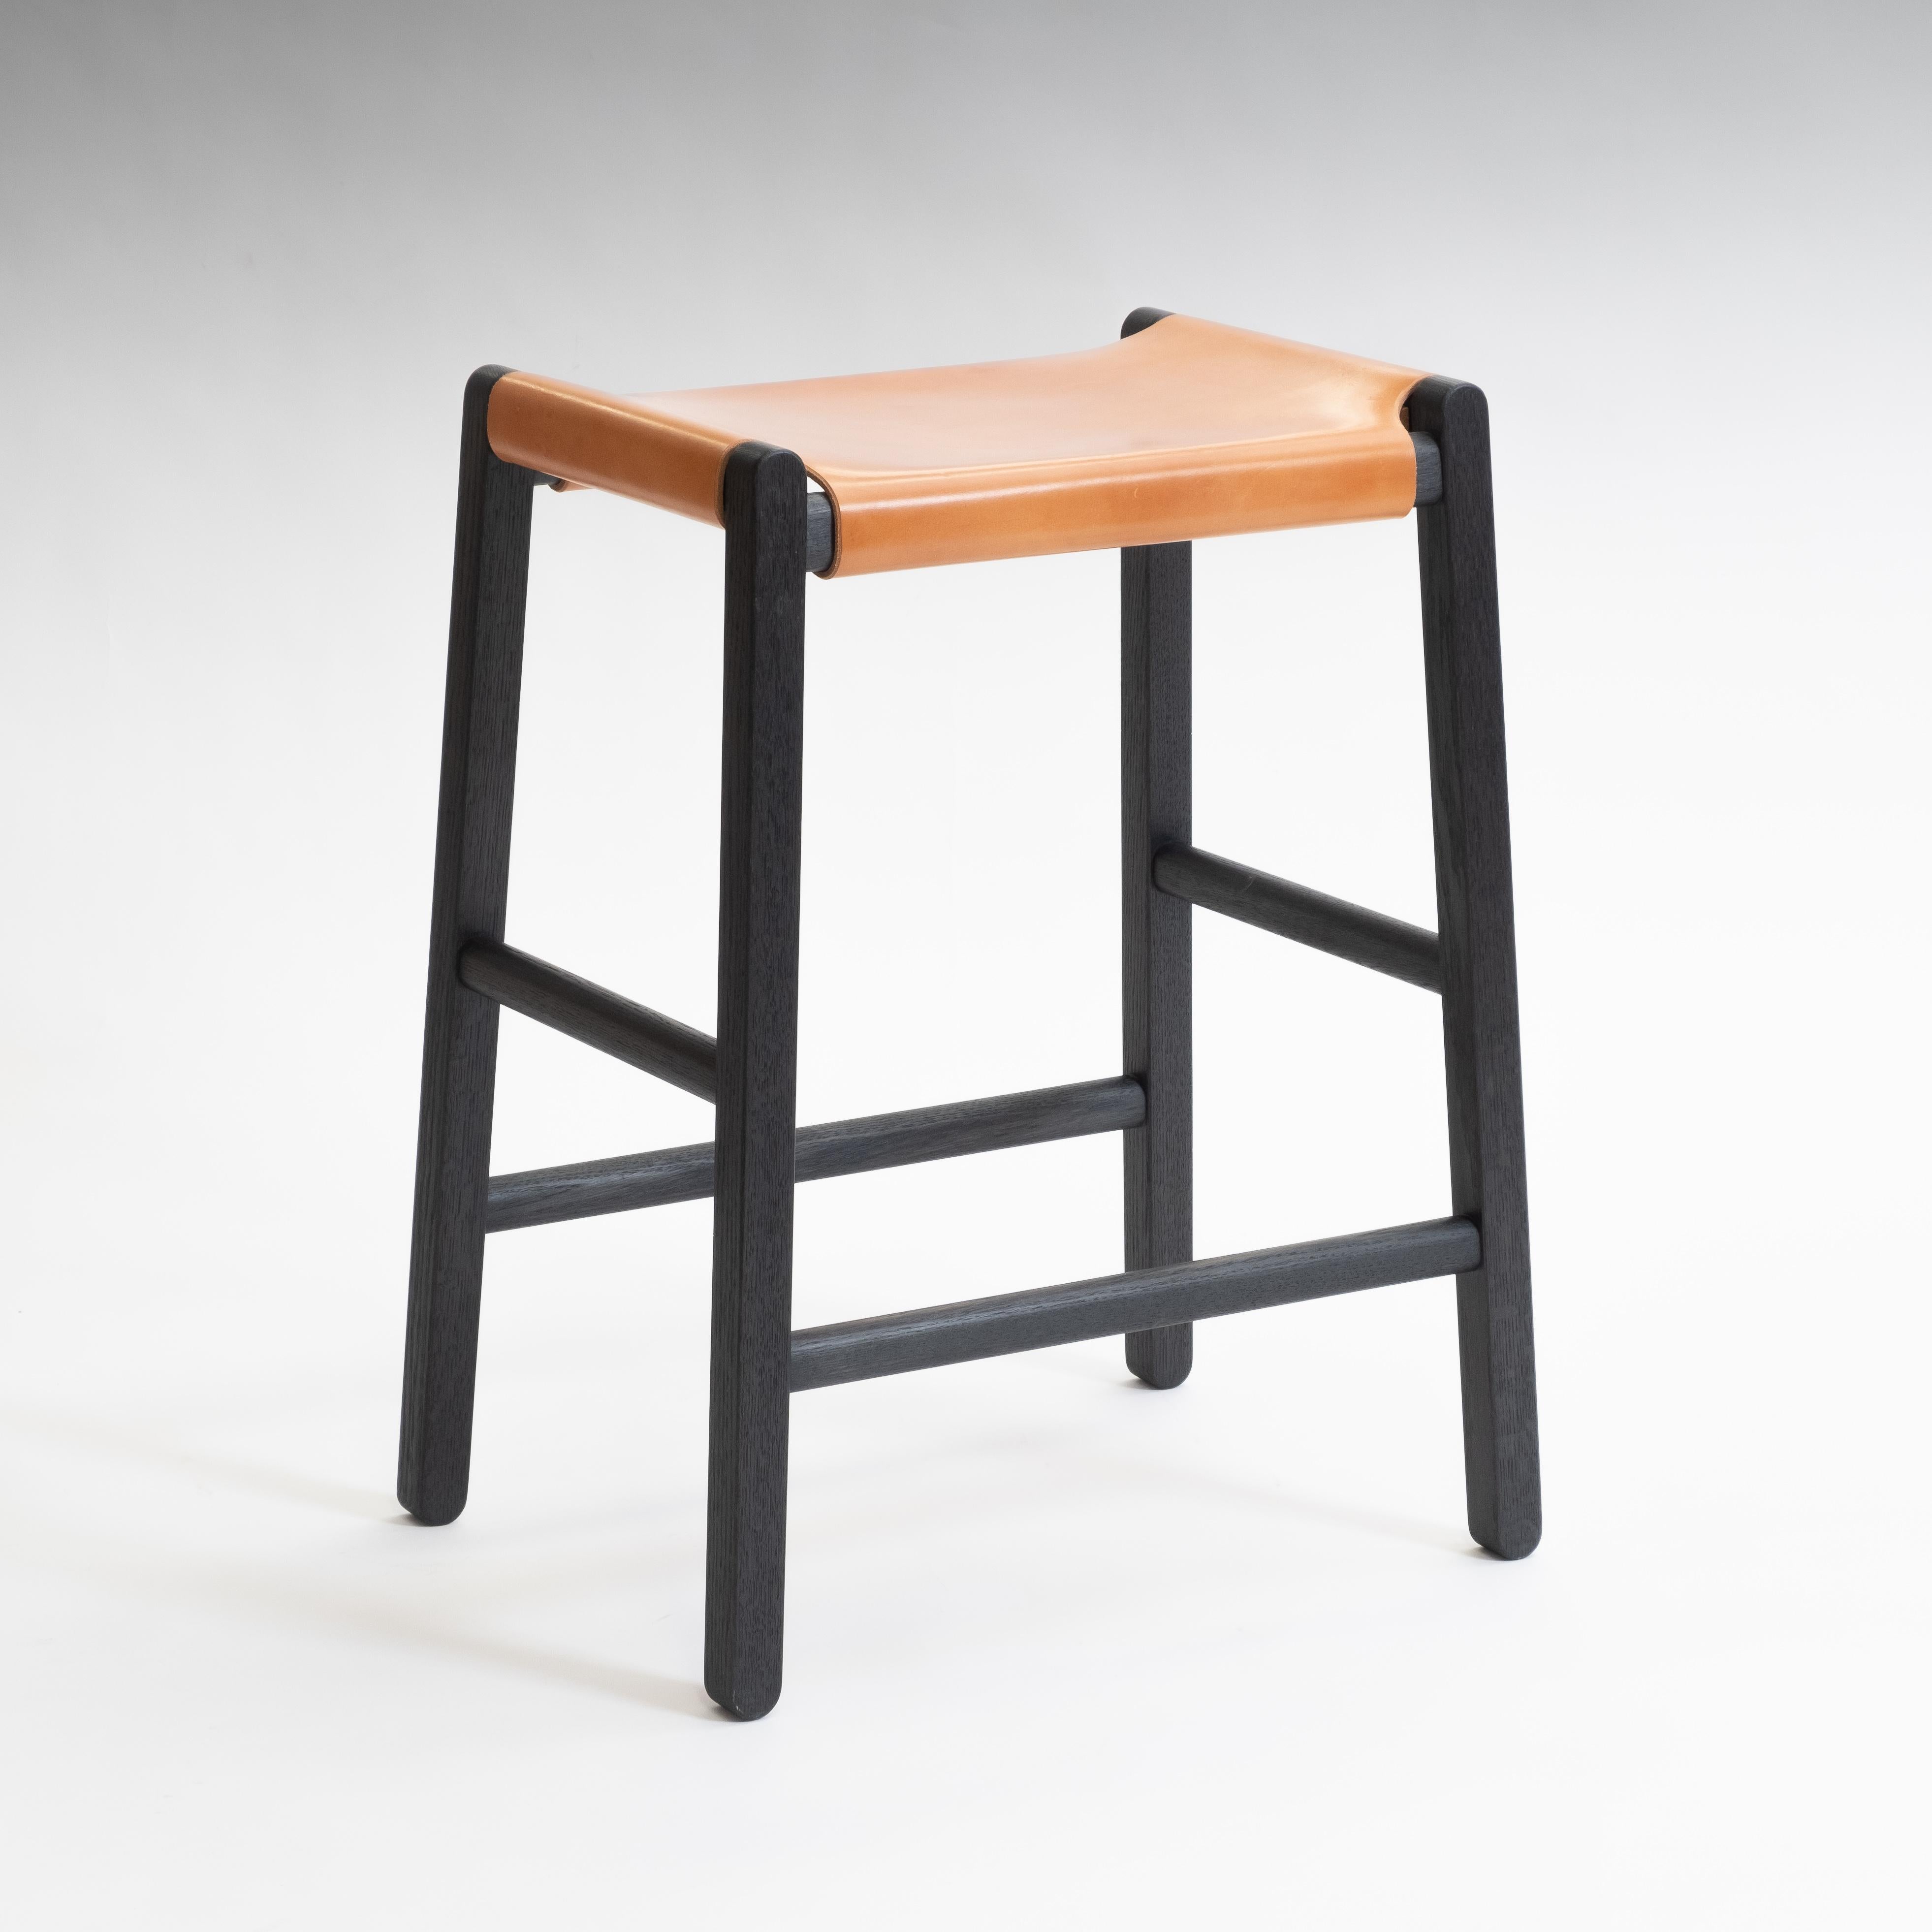 The Saddle stool is a refined Mid-Century Modern-inspired counter-height stool with a wide range of material and finish options. The clean-lined oak frame features rounded contours and durable mortise and tenon joints. The resilient seat is a sheet